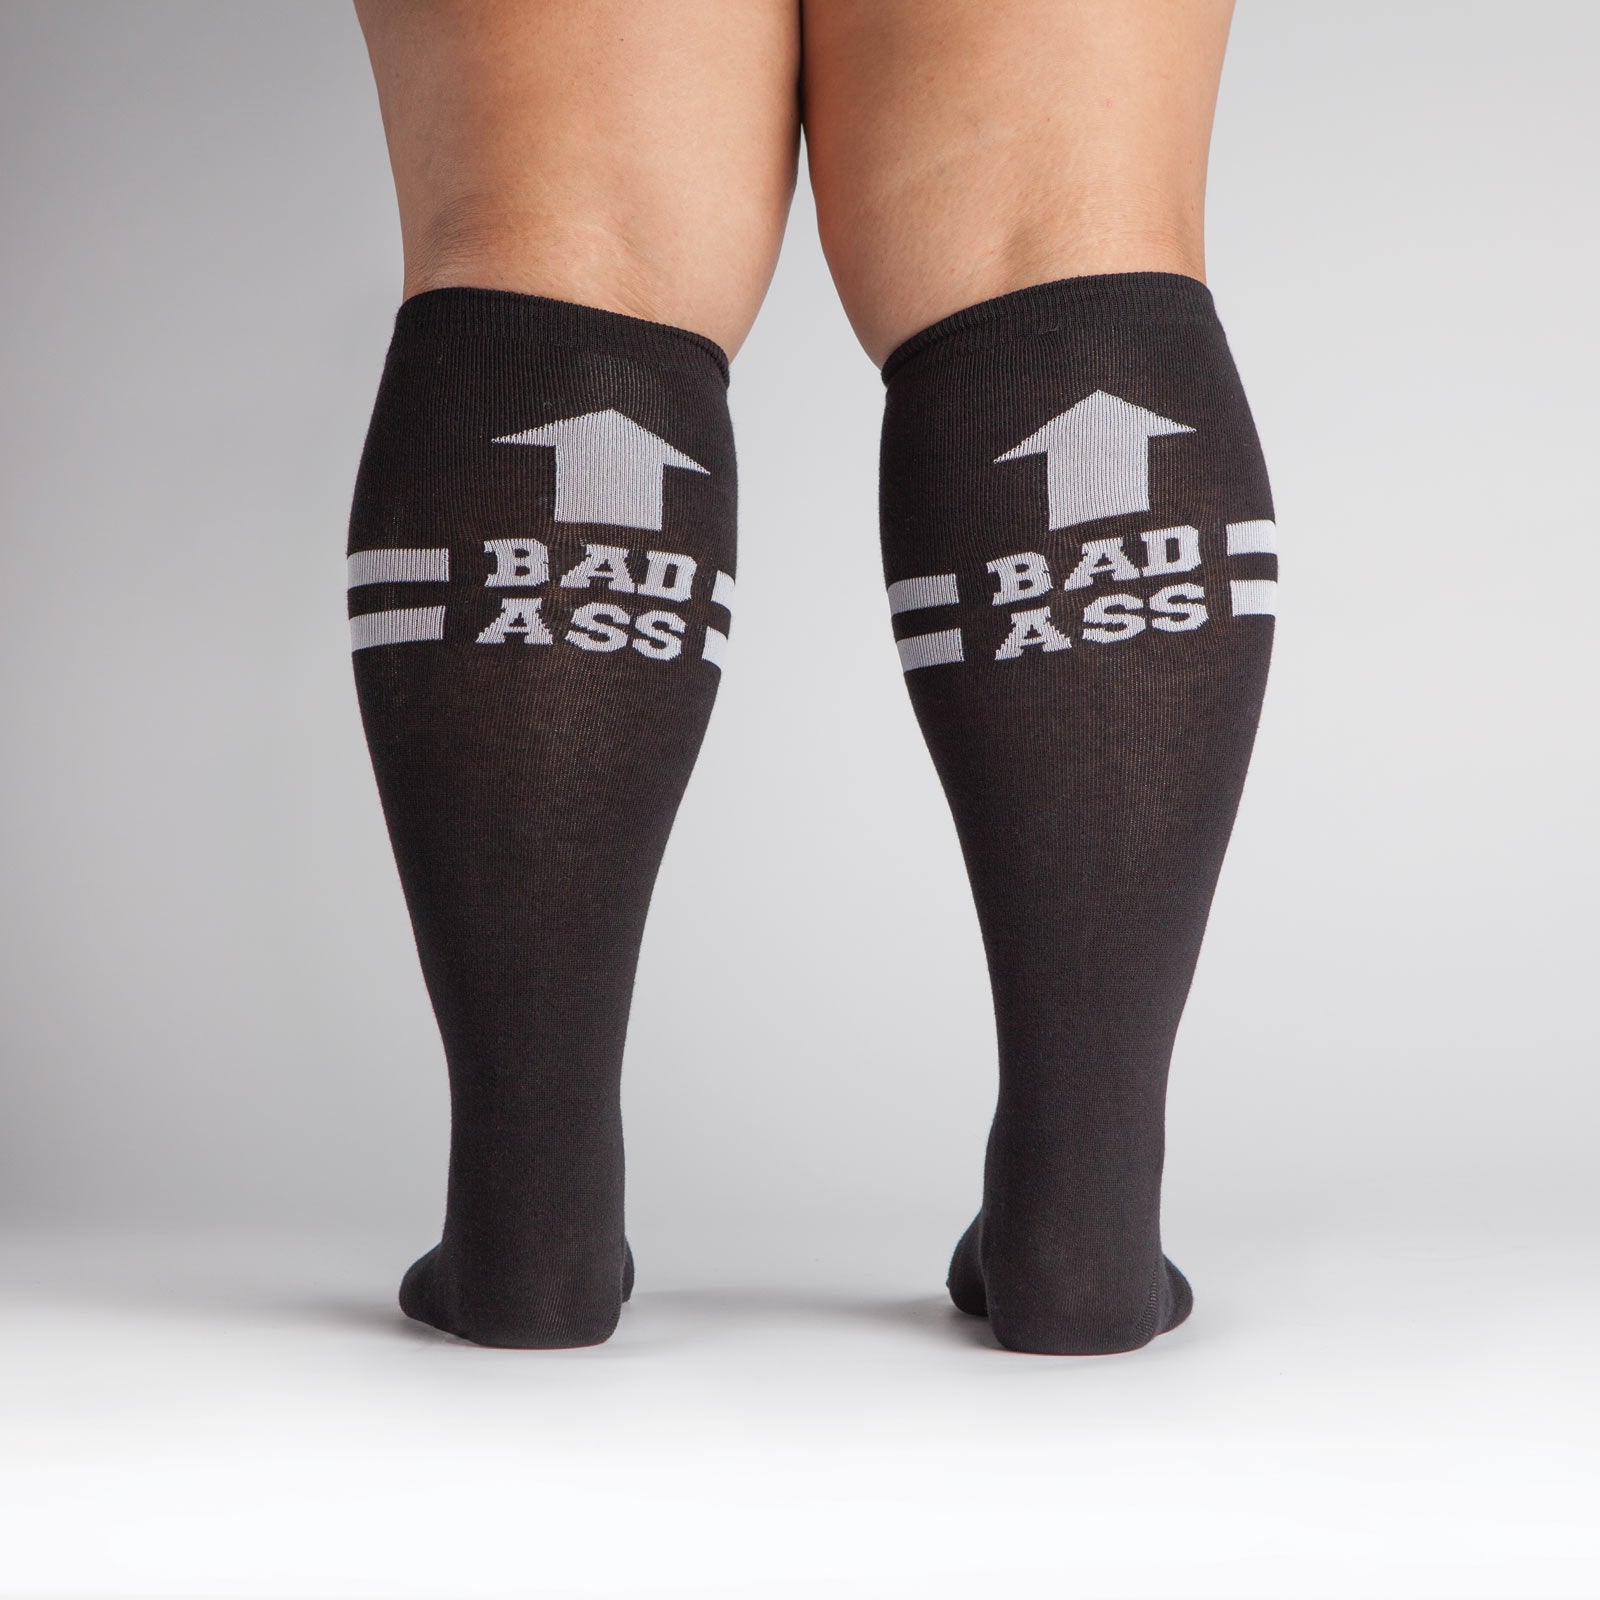 Sock It To Me Bad Ass extra-stretchy women's and men's socks featuring black socks with "Bad Ass" and arrow pointing up worn by model shown from back